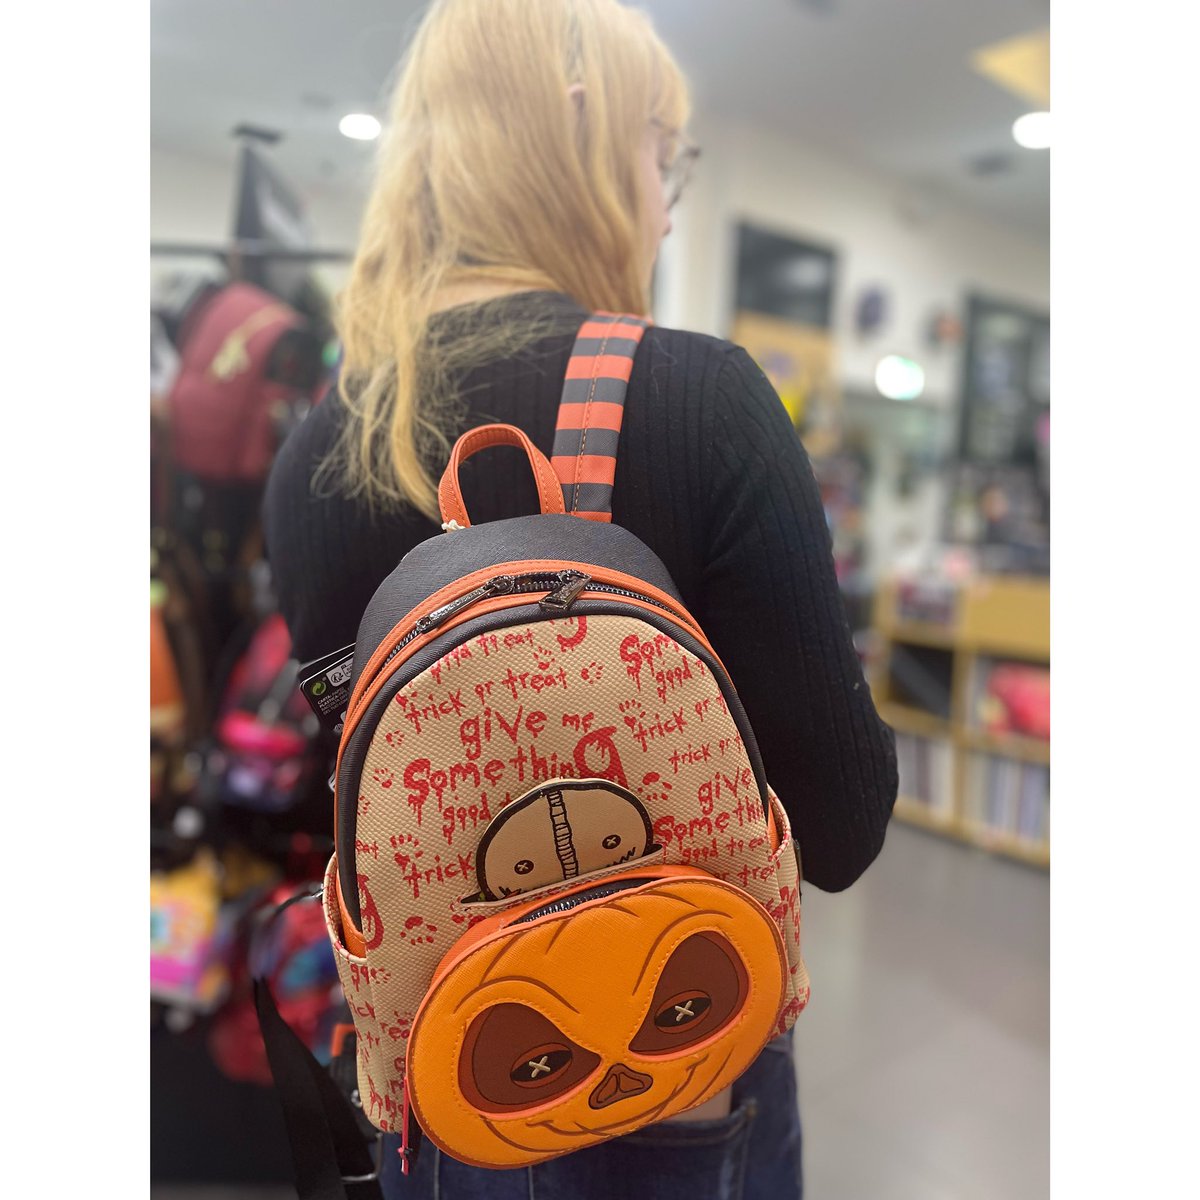 SPOOKY SZN LOUNGEFLY! 🎃 These bags from @Loungefly are simply to die for! 👻 Whilst stock lasts! ✨ #lovemyloungefly #loungefly #hmv